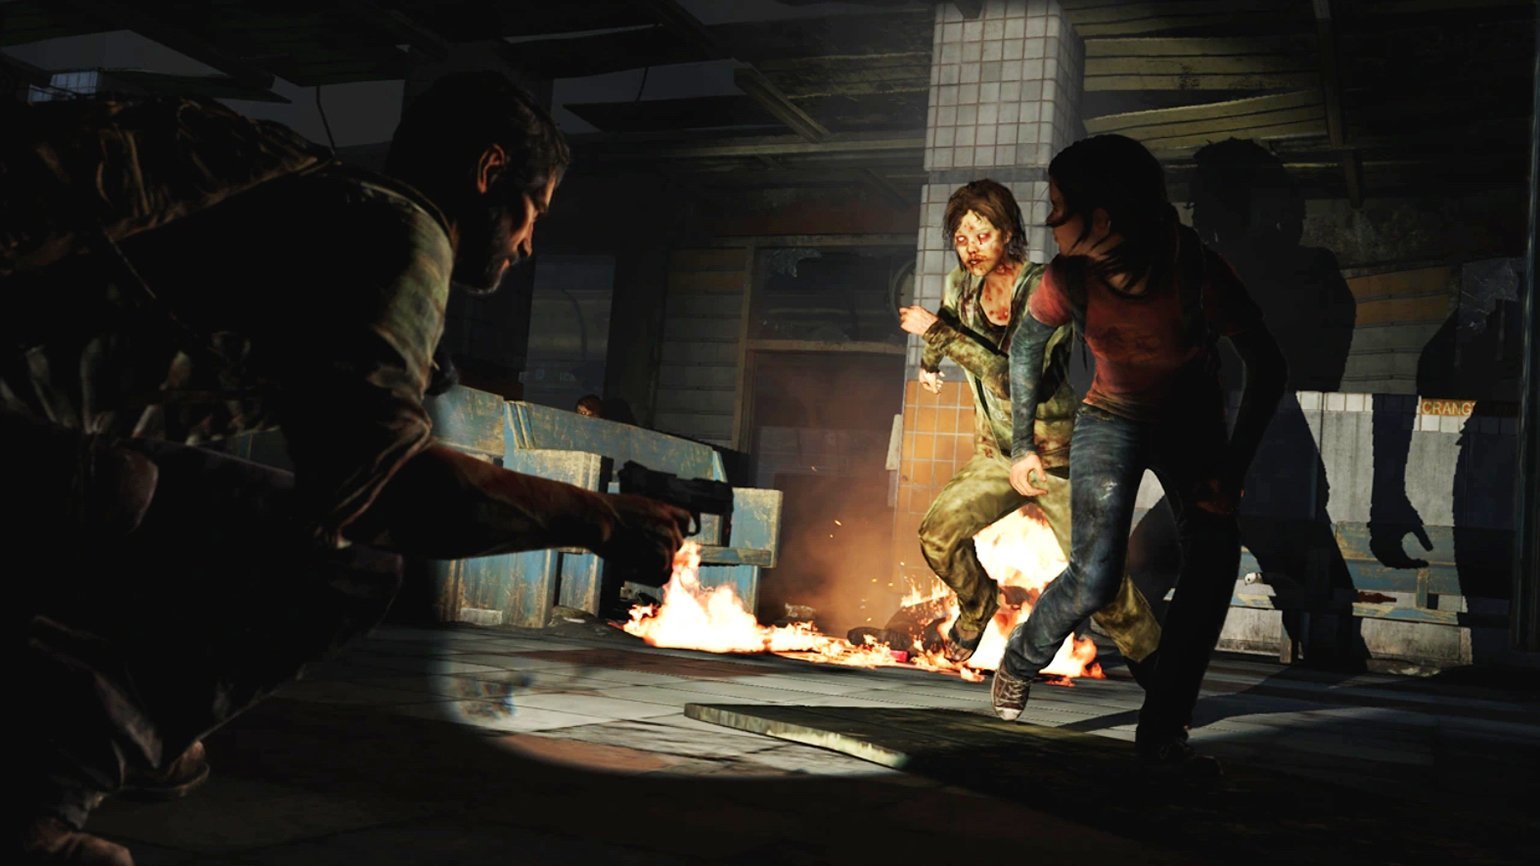 The last of us 1. The last of us игра. The last of us 2013. Зе ласт парт 1